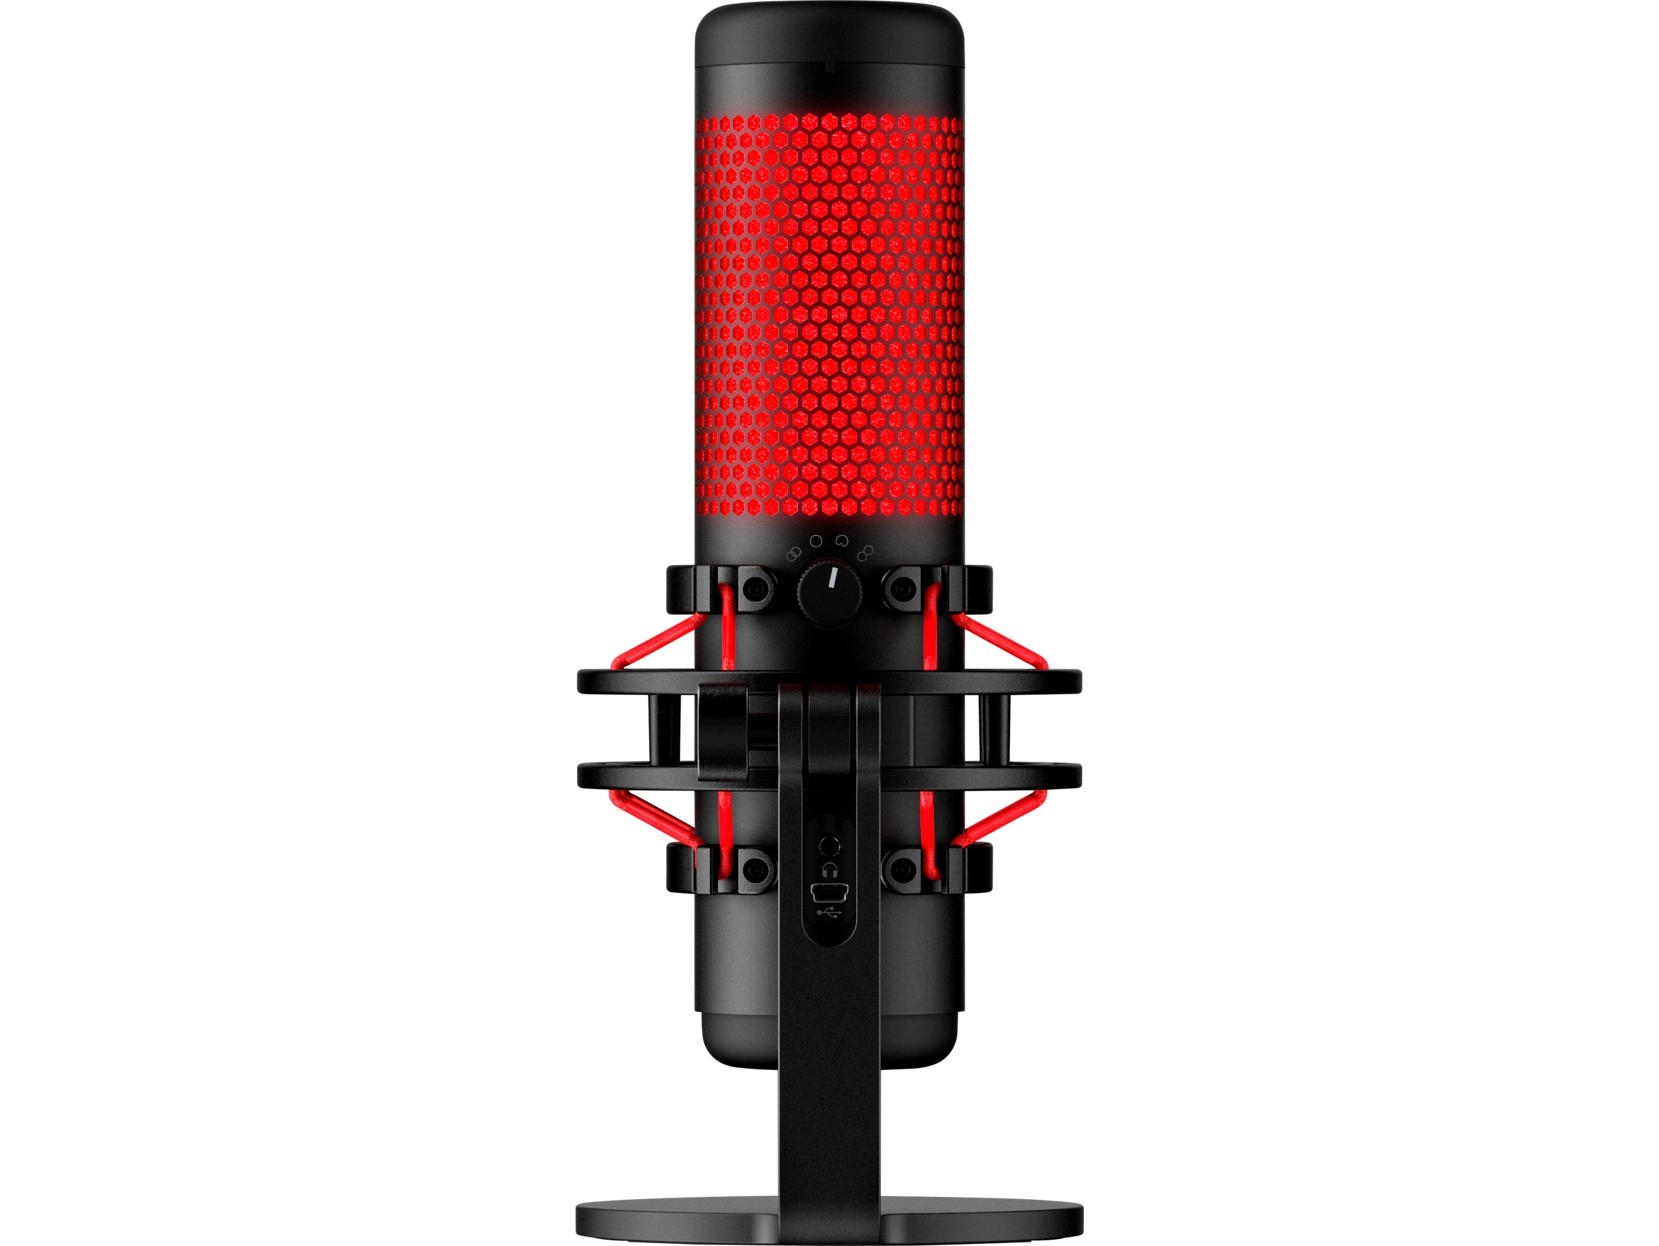 HyperX QuadCast, Black, Microphone for the streaming, Anti-Vibration shock mount, Tap-to-Mute sensor with LED indicator, Four selectable polar patterns, Internal pop filter, Built-in headphone jack, Cable length: 3m, Black/Red,  USB